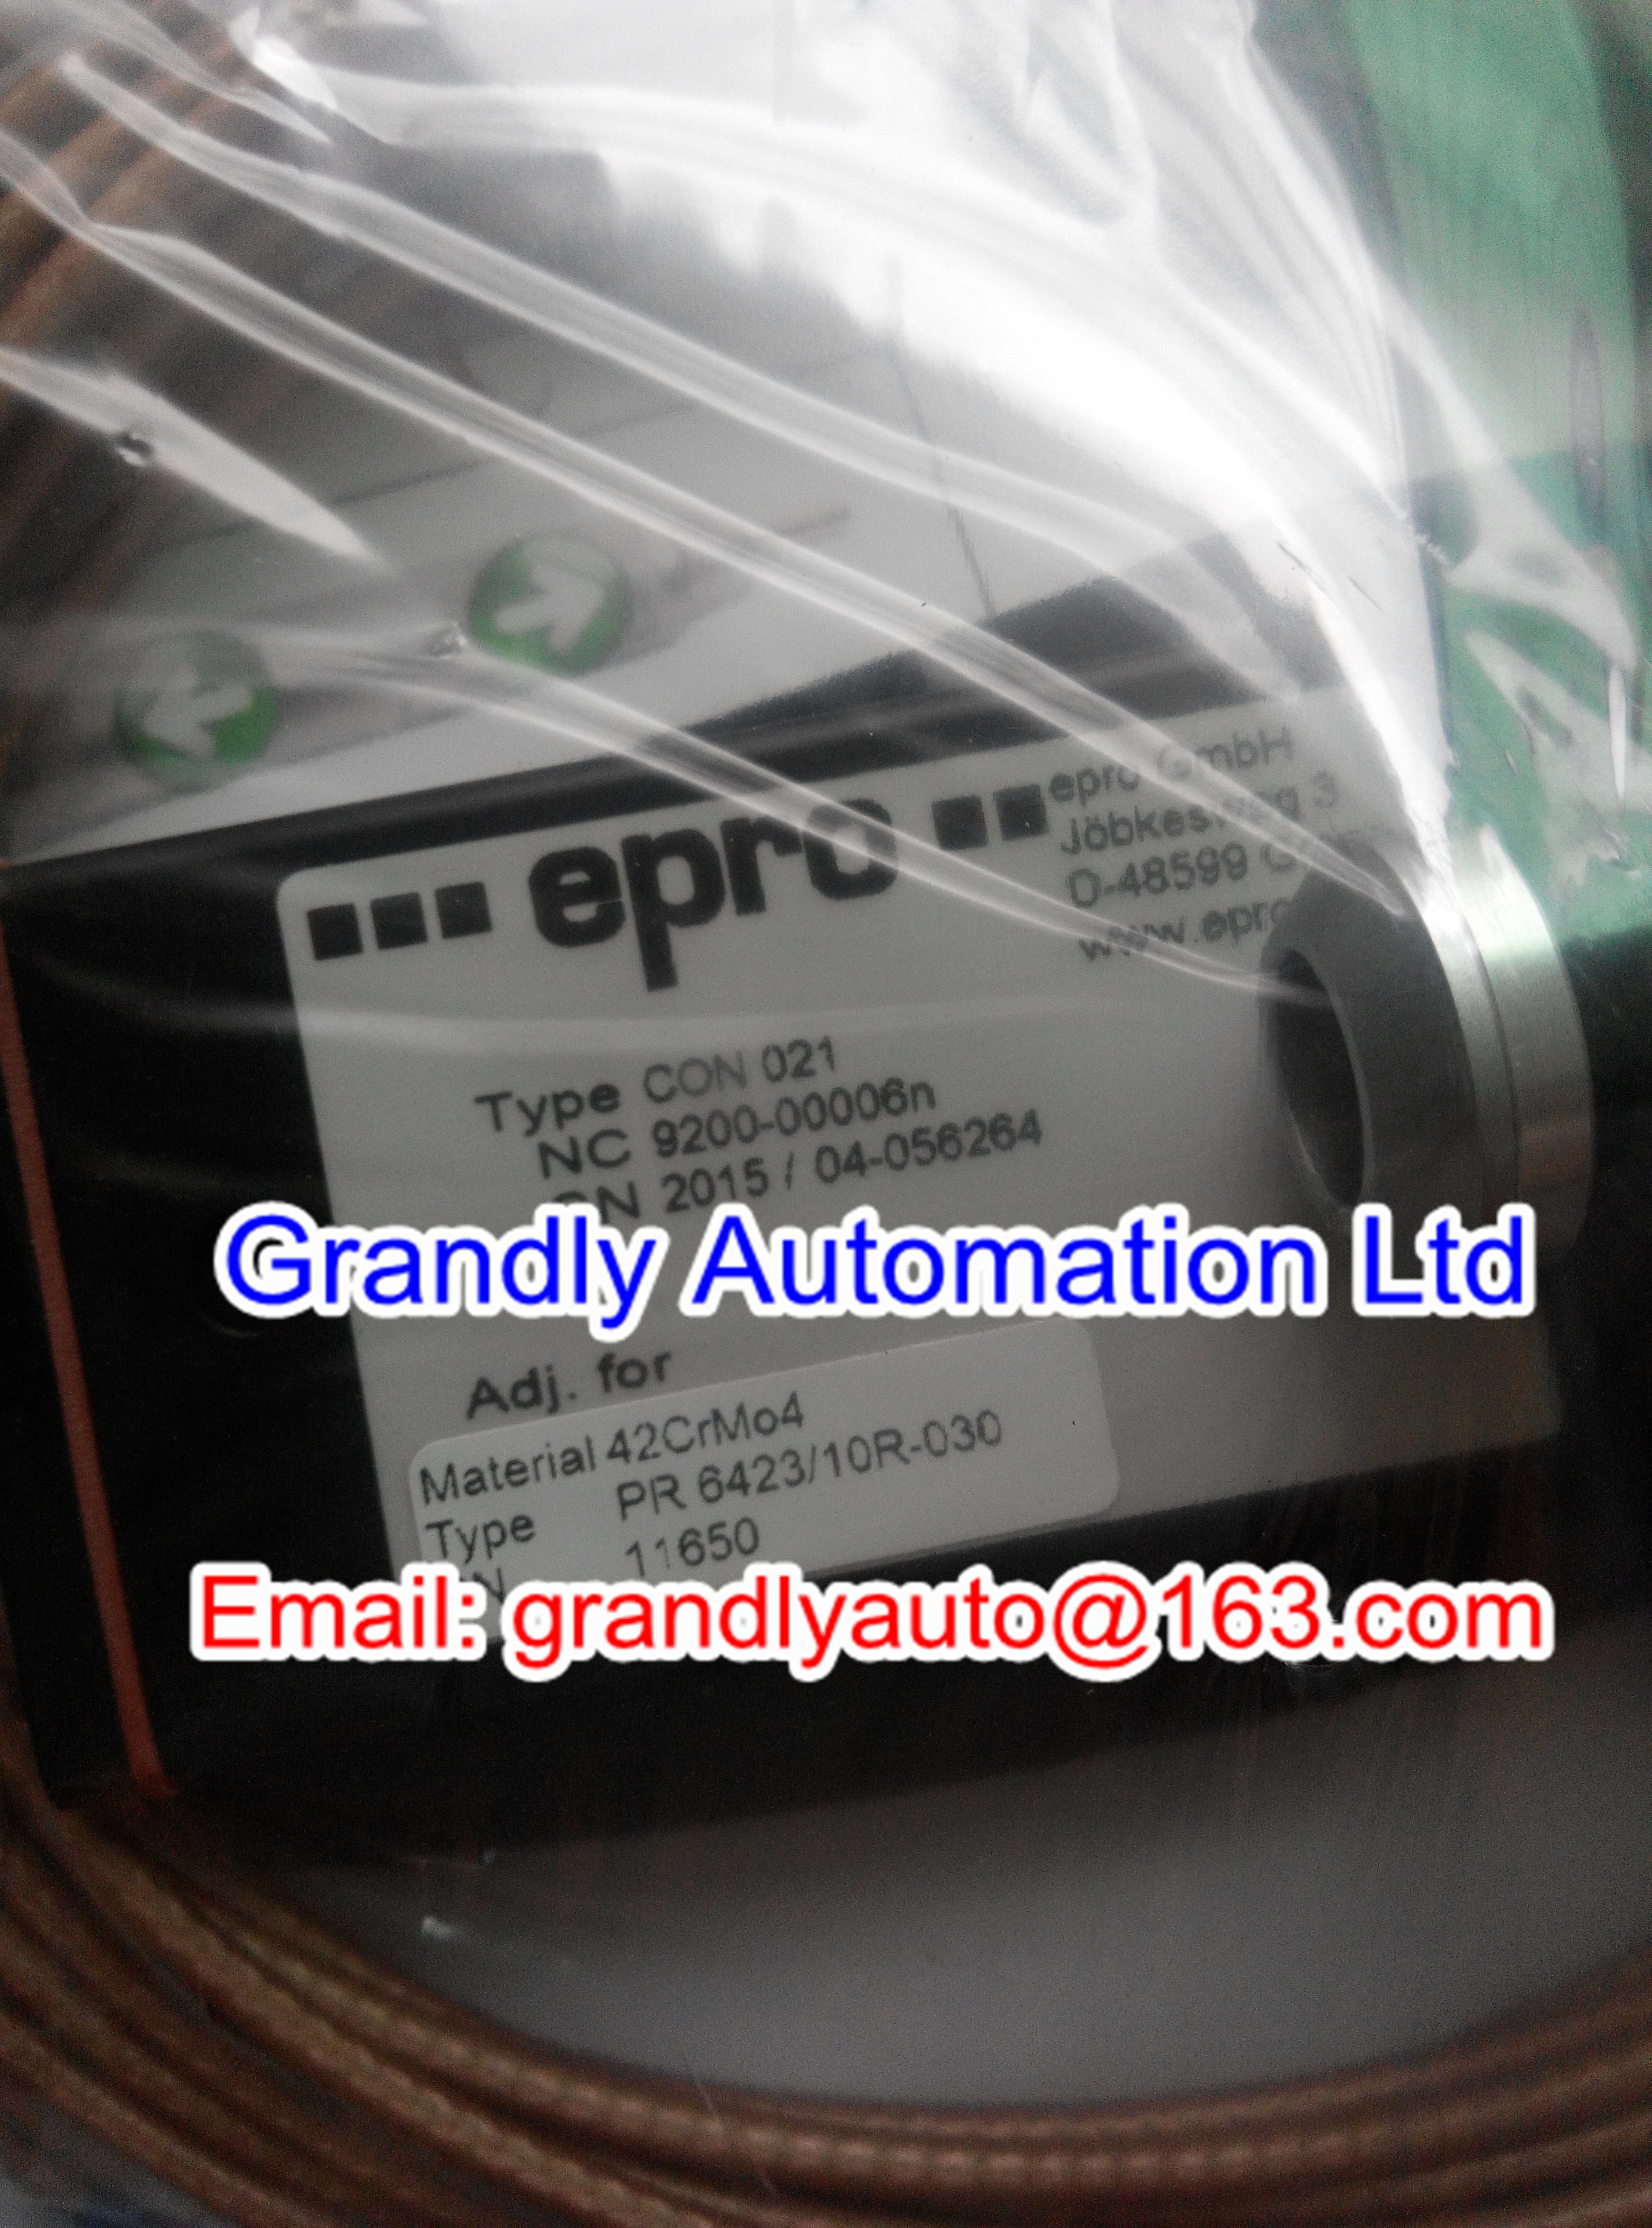 Quality New EPRO RSM 010 Monitor in stock-Buy at Grandly Automation Ltd